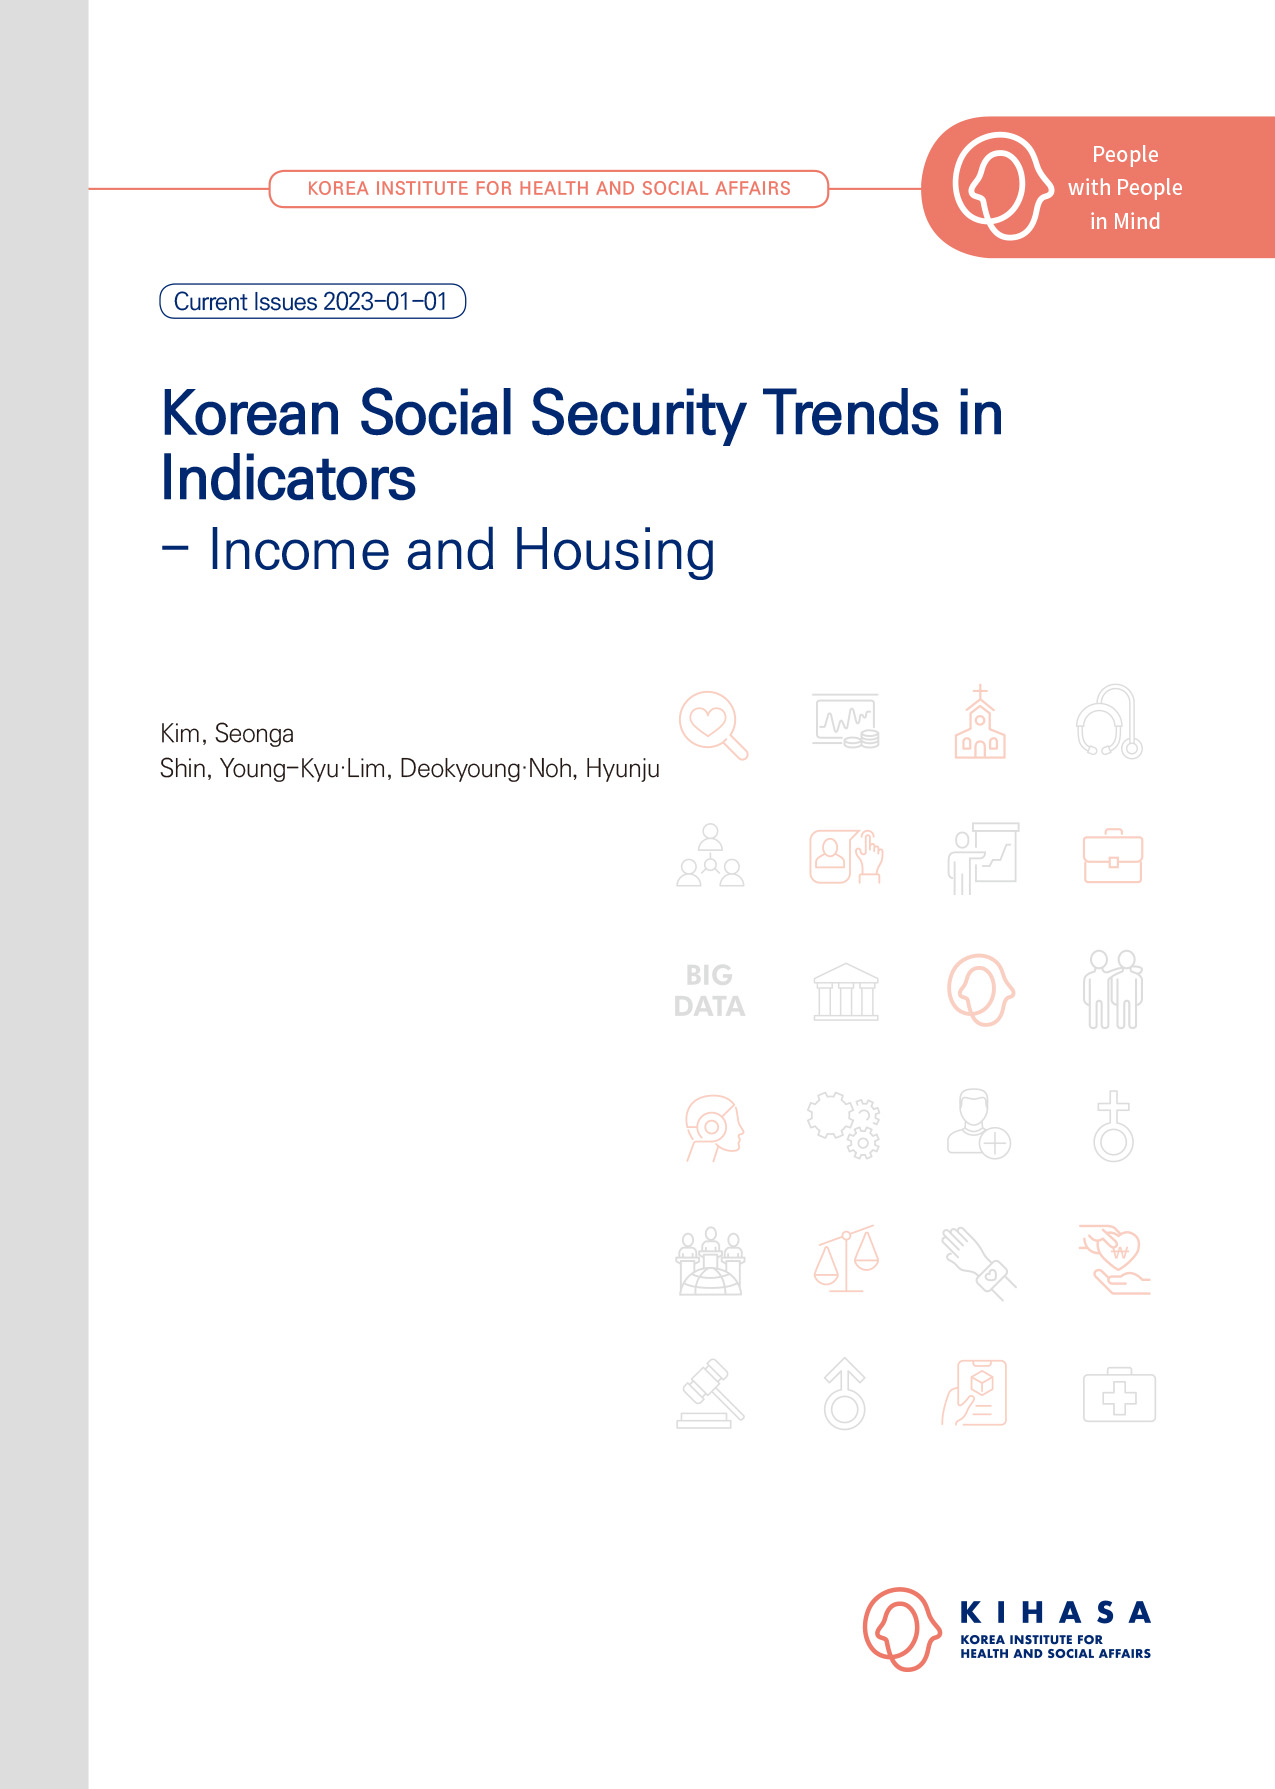 Korean Social Security Trends in Indicators - Income and Housing